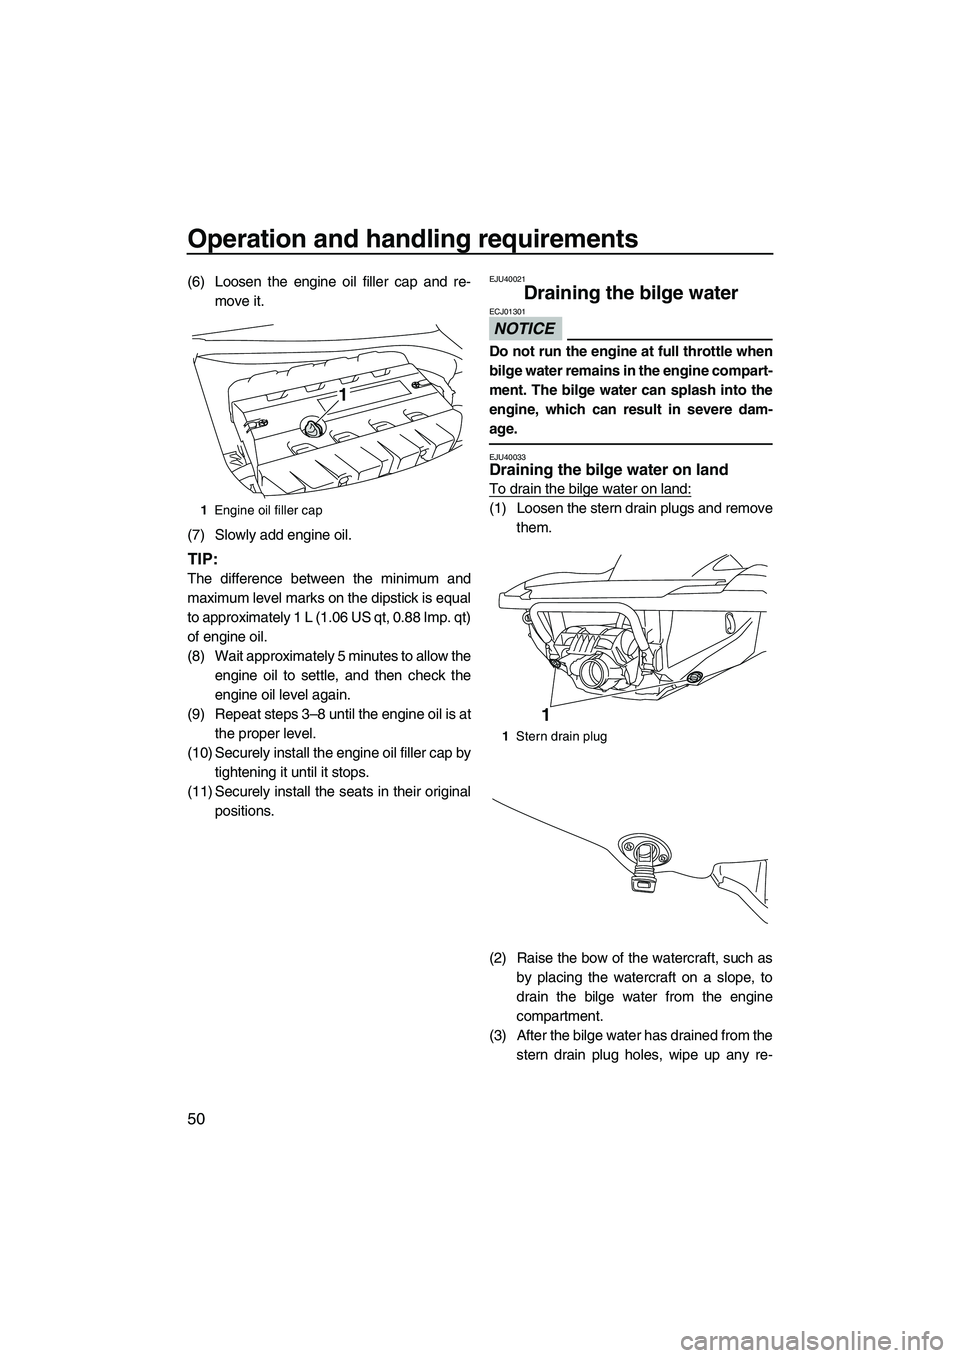 YAMAHA FZR 2013  Owners Manual Operation and handling requirements
50
(6) Loosen the engine oil filler cap and re-move it.
(7) Slowly add engine oil.
TIP:
The difference between the minimum and
maximum level marks on the dipstick i